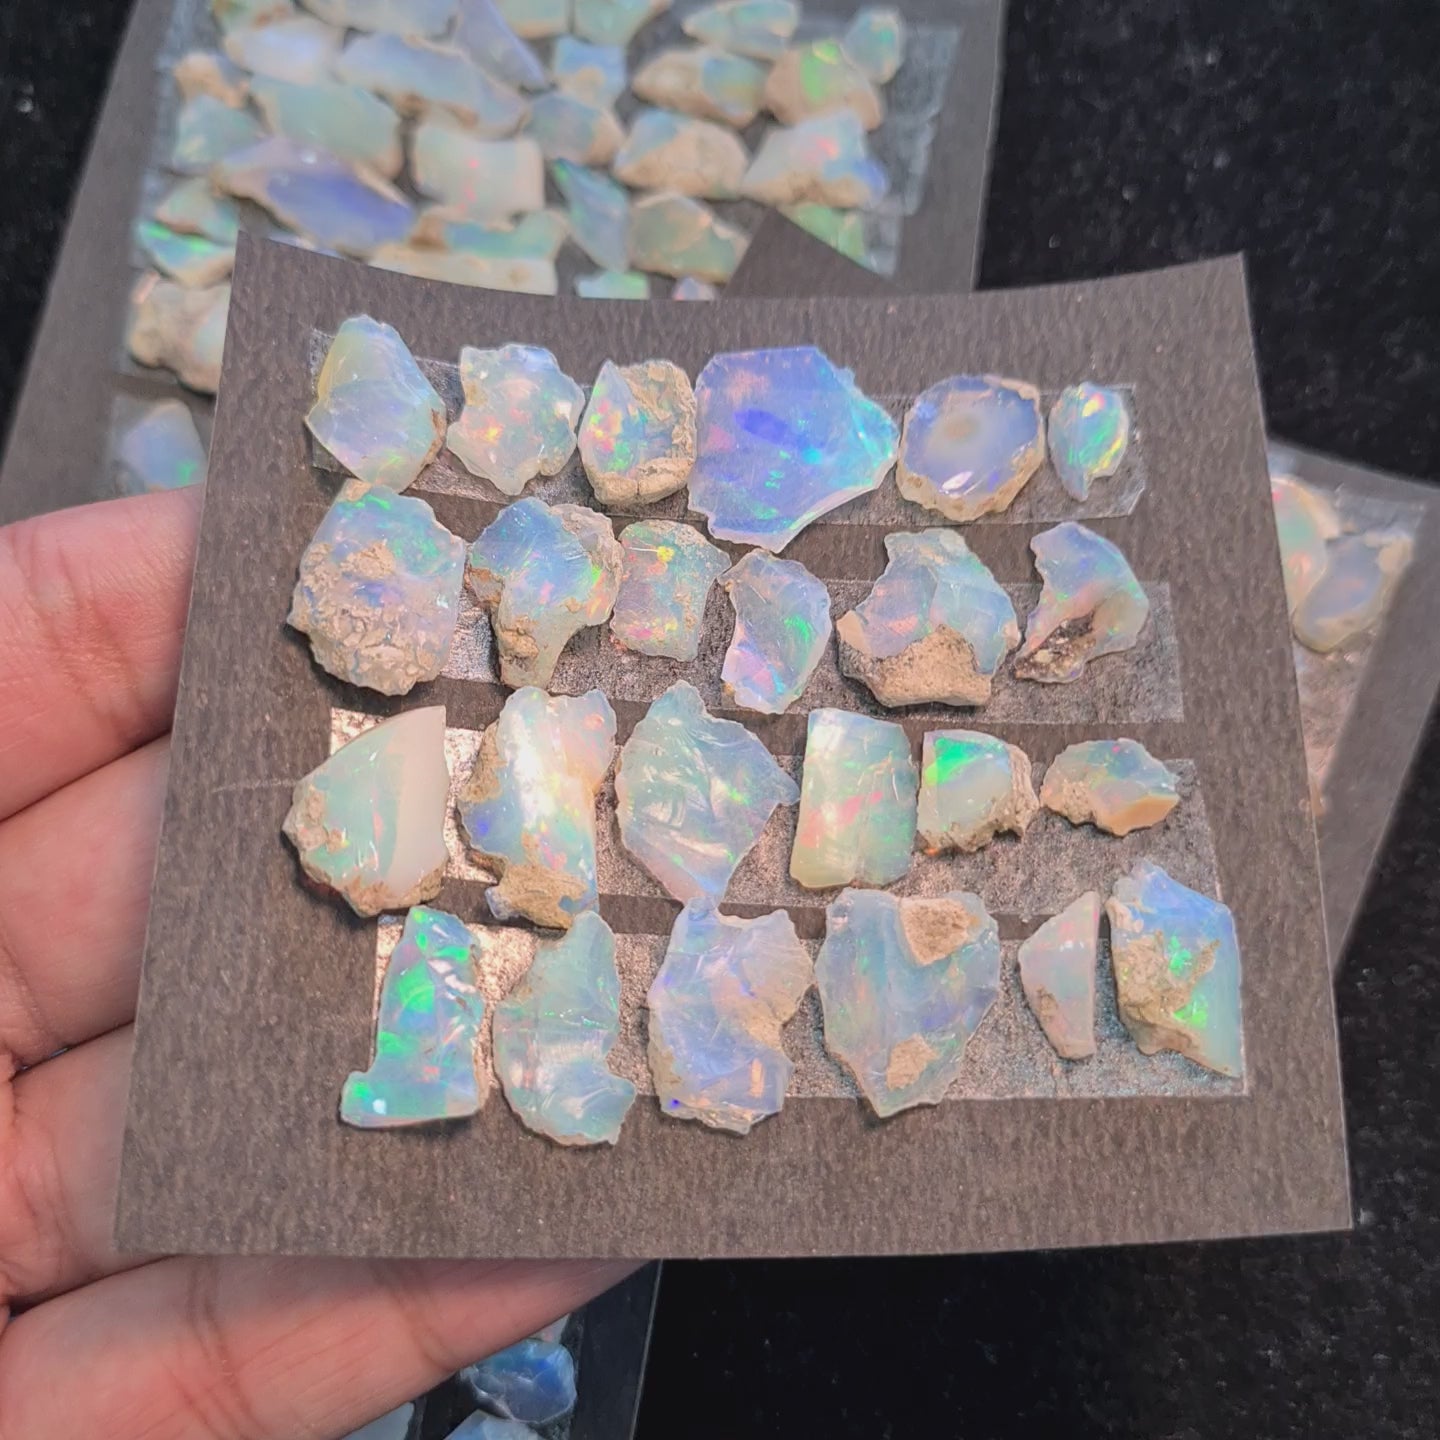 Wholesale Opal Raw Rough Natural Multi Fire Opal Rough Welo Opal Rough Ethiopian Opal Rough